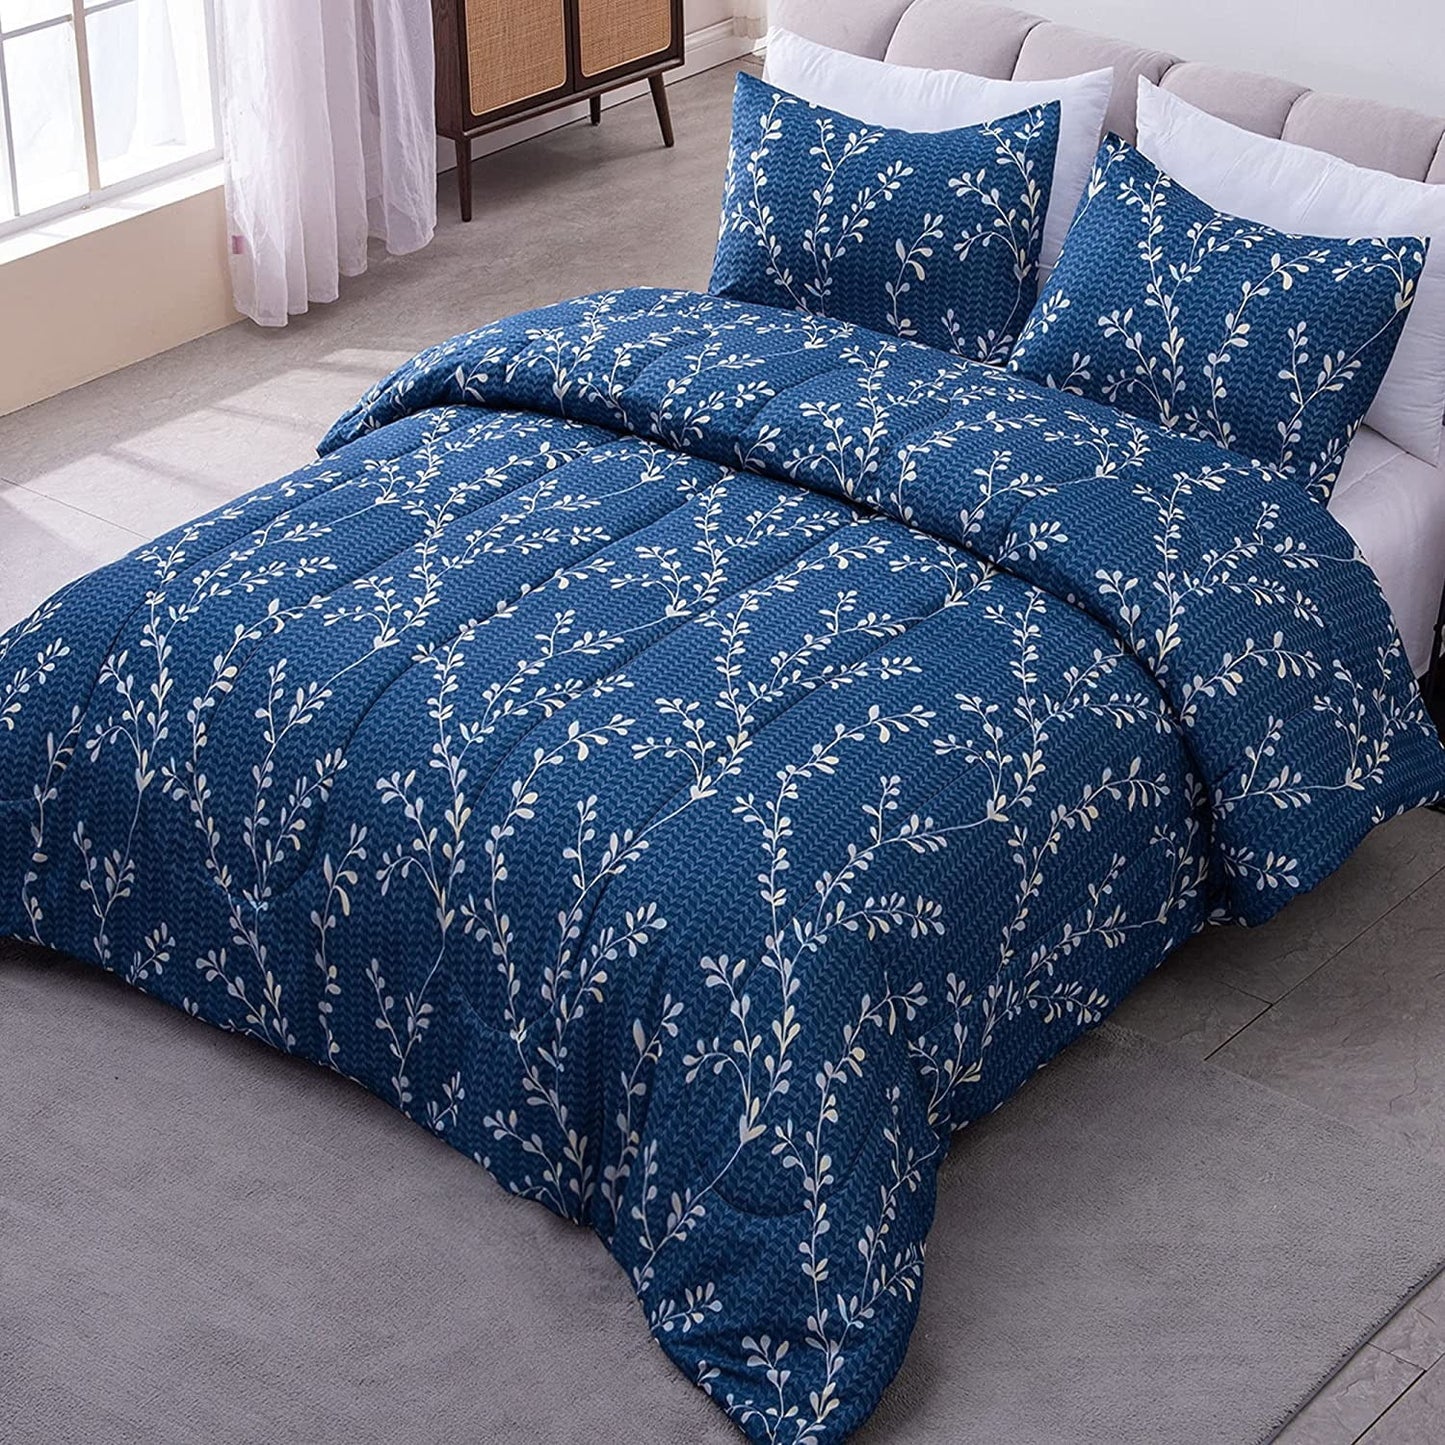 Exclusivo Mezcla 2-Piece Floral Twin Comforter Set, Microfiber Bedding Down Alternative Comforter for All Seasons with 1 Pillow Sham, Navy